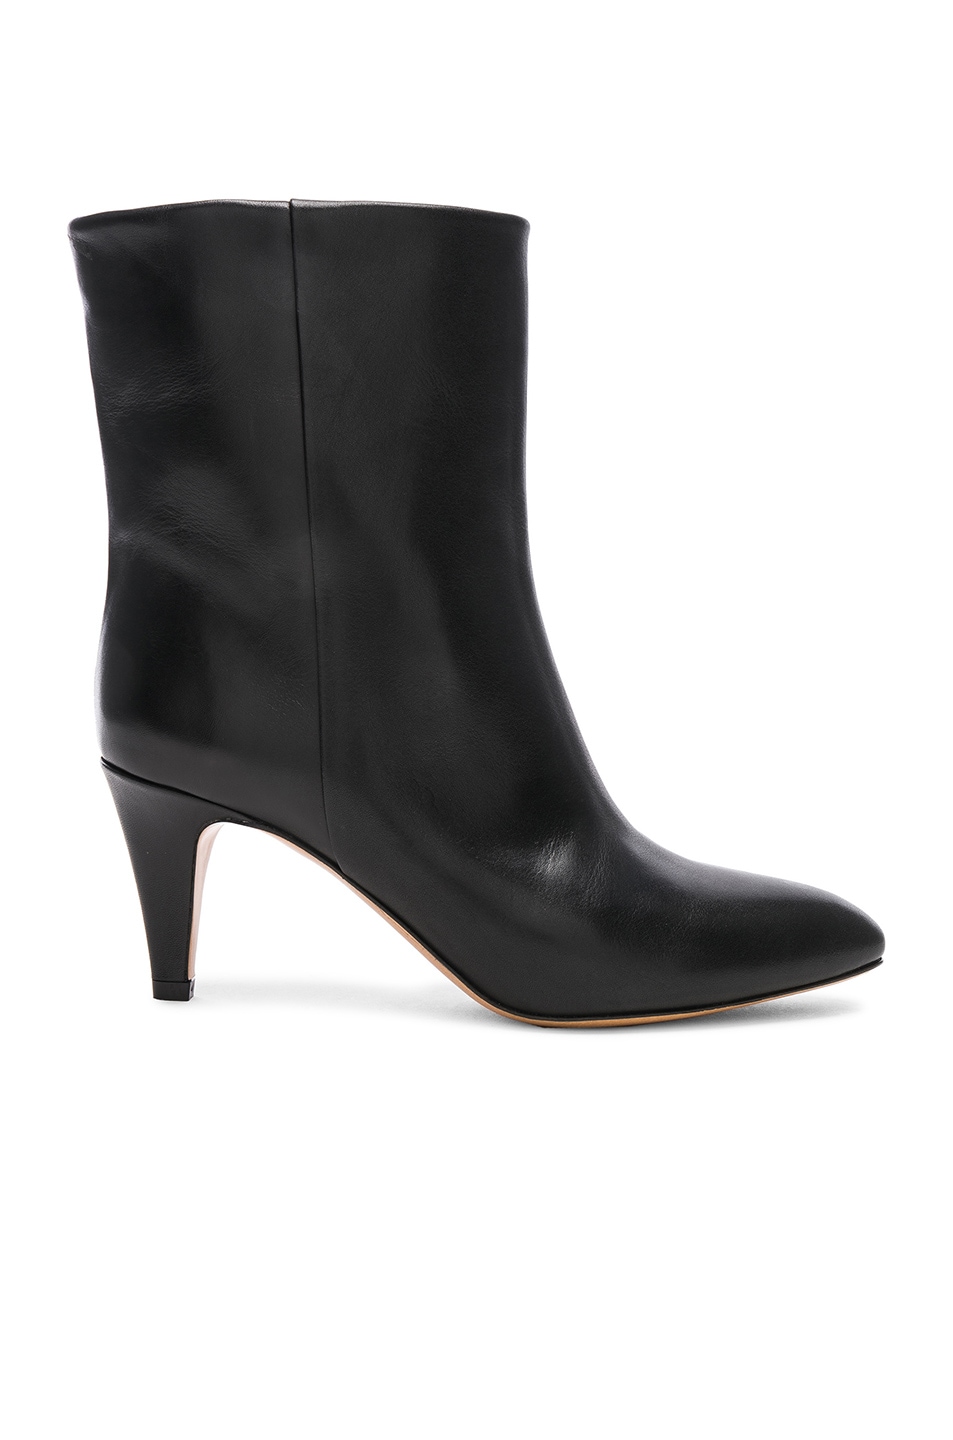 Isabel Marant Leather Dailan Boots in Black | FWRD